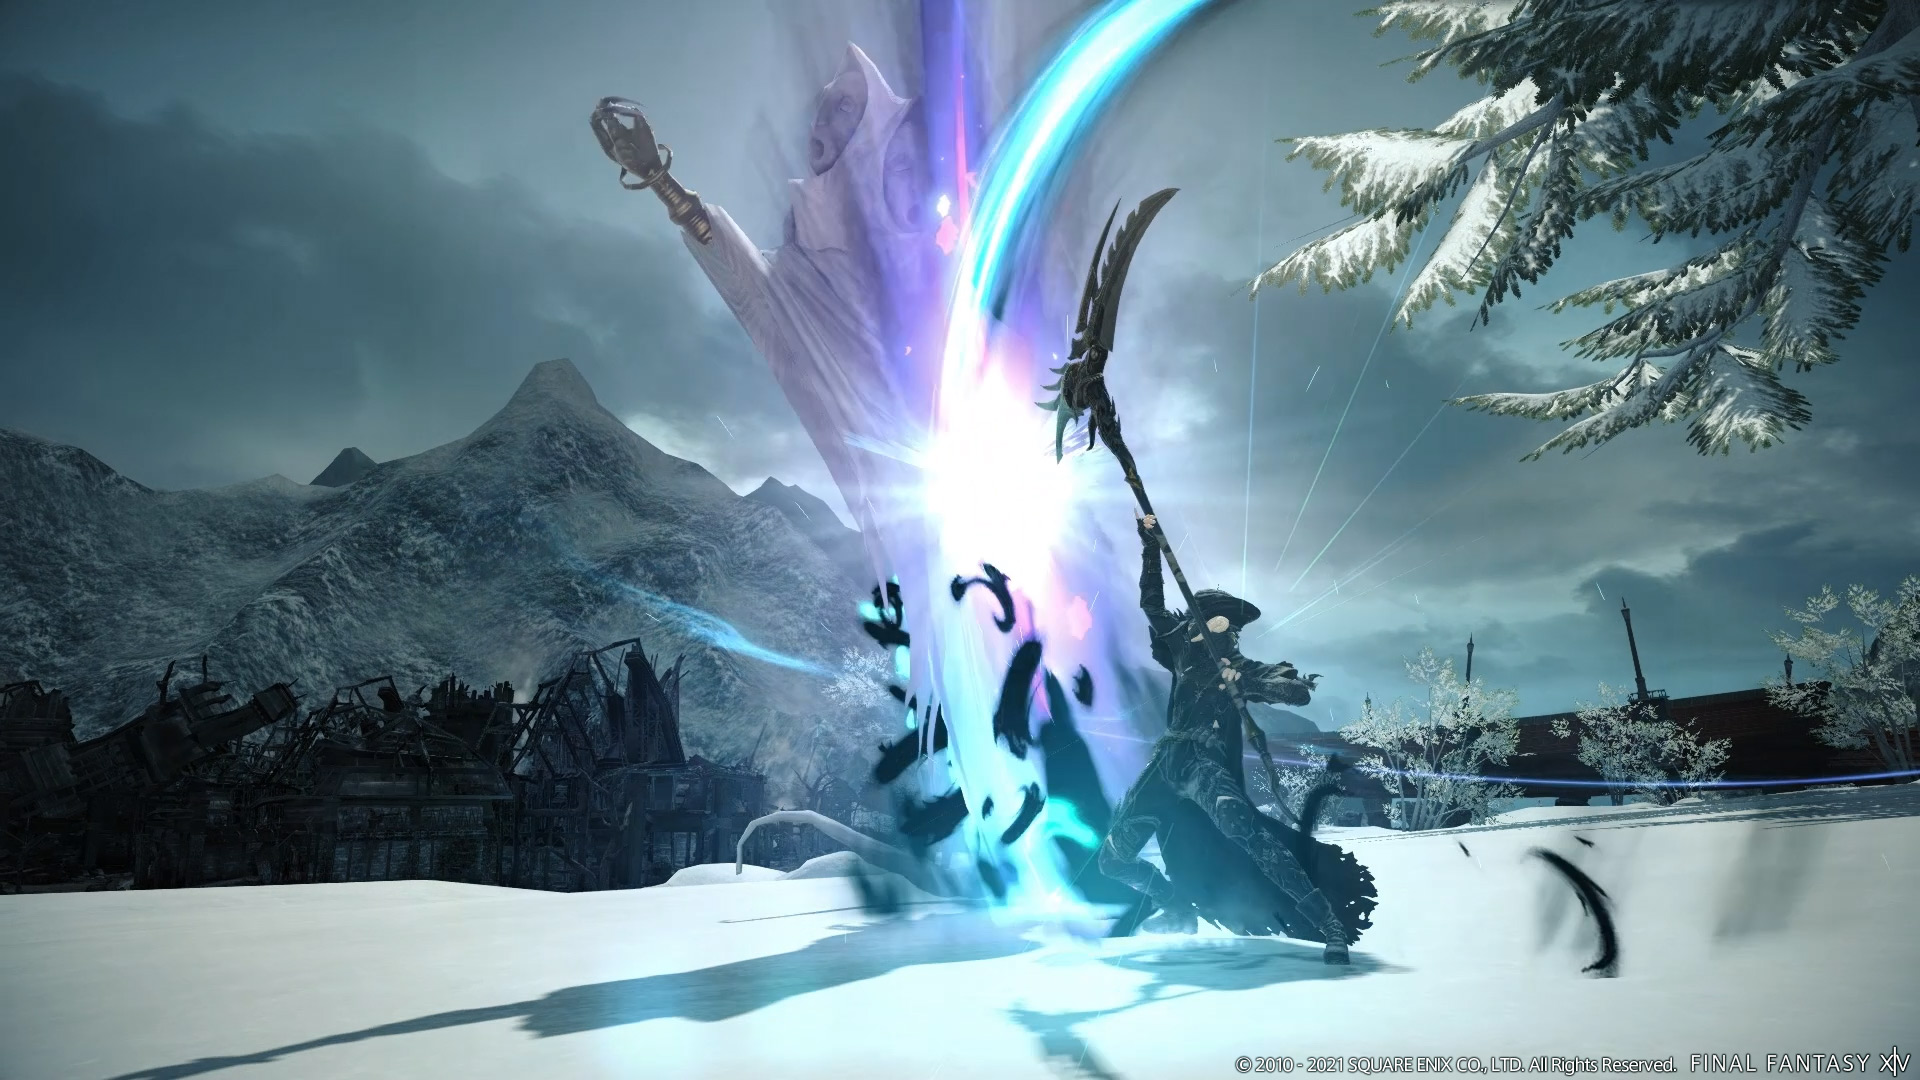 FFXIV Endwalker Reaper, doing some kind of spooky ability with their scythe in a snowy area.